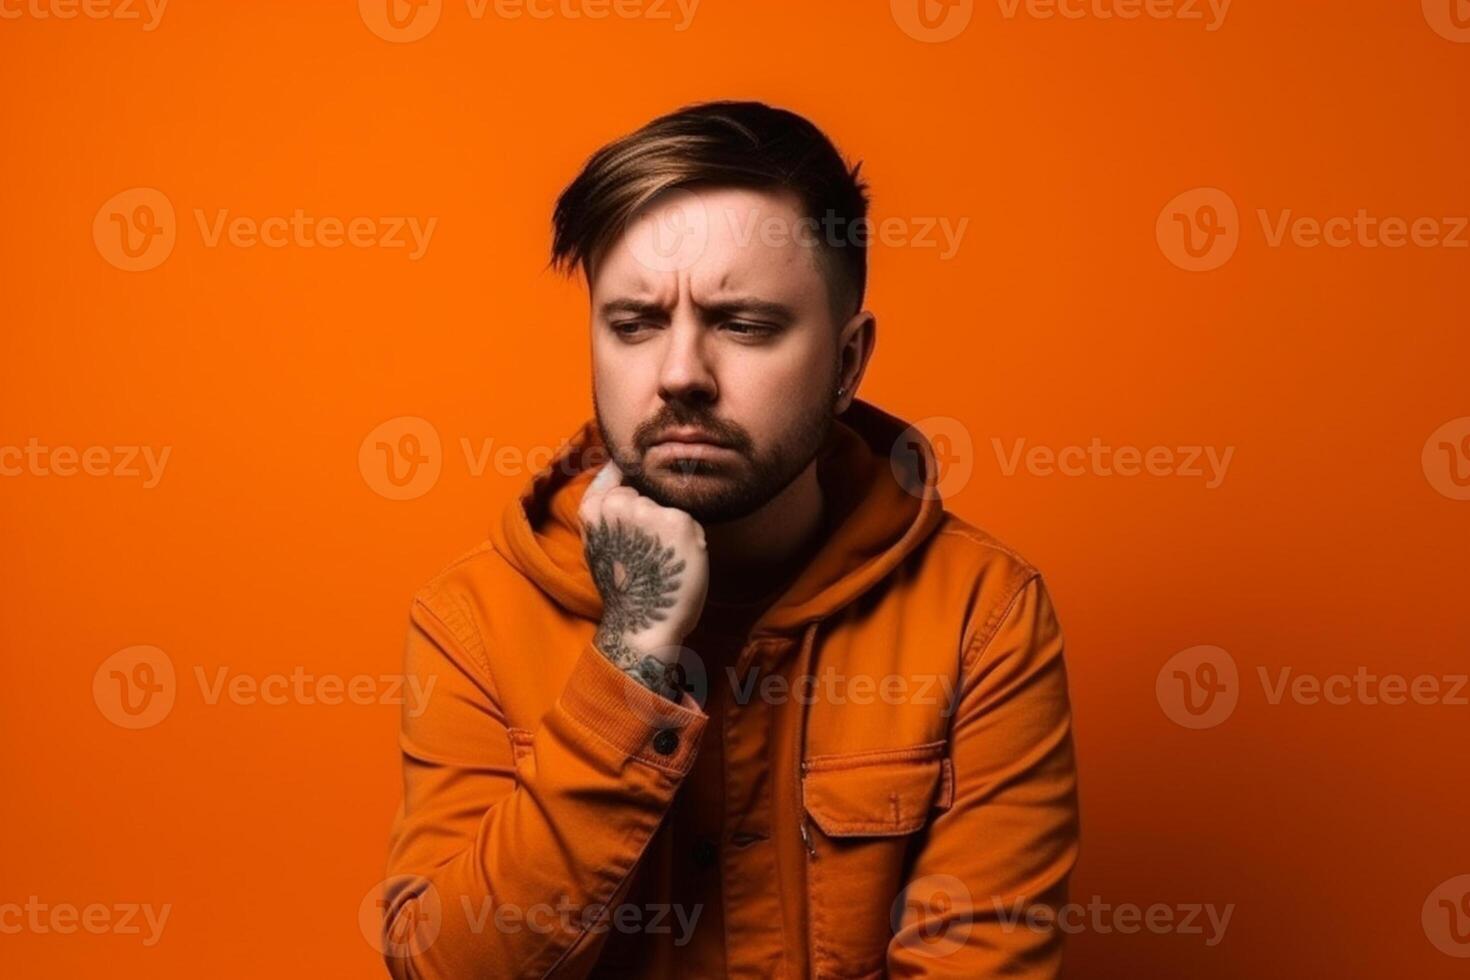 a man on solid color background photoshoot with Fear face expression photo